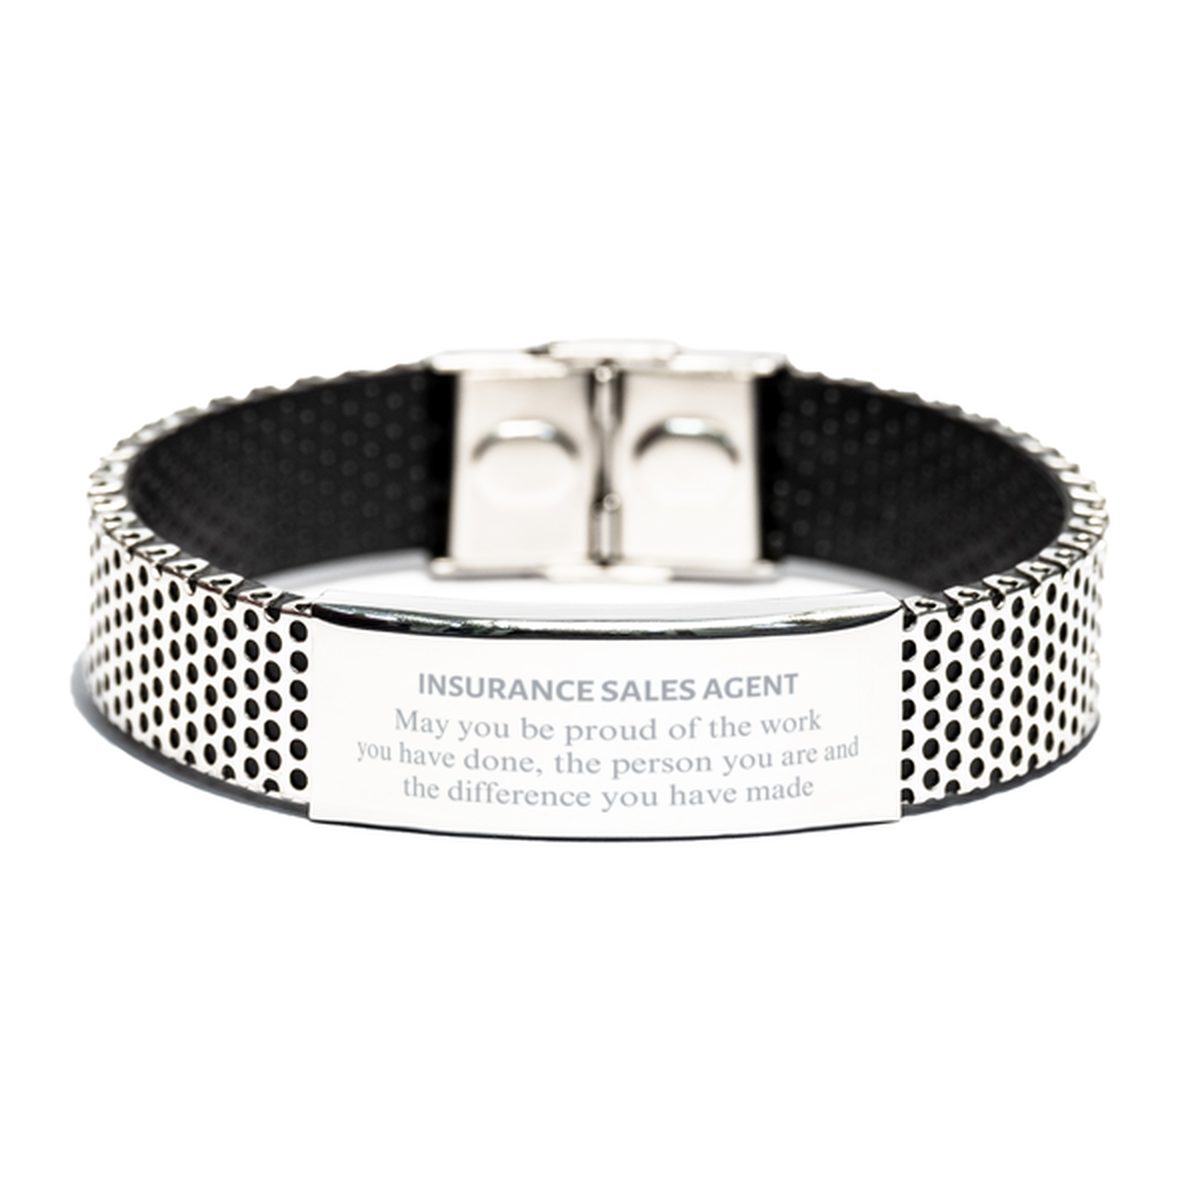 Insurance Sales Agent May you be proud of the work you have done, Retirement Insurance Sales Agent Stainless Steel Bracelet for Colleague Appreciation Gifts Amazing for Insurance Sales Agent